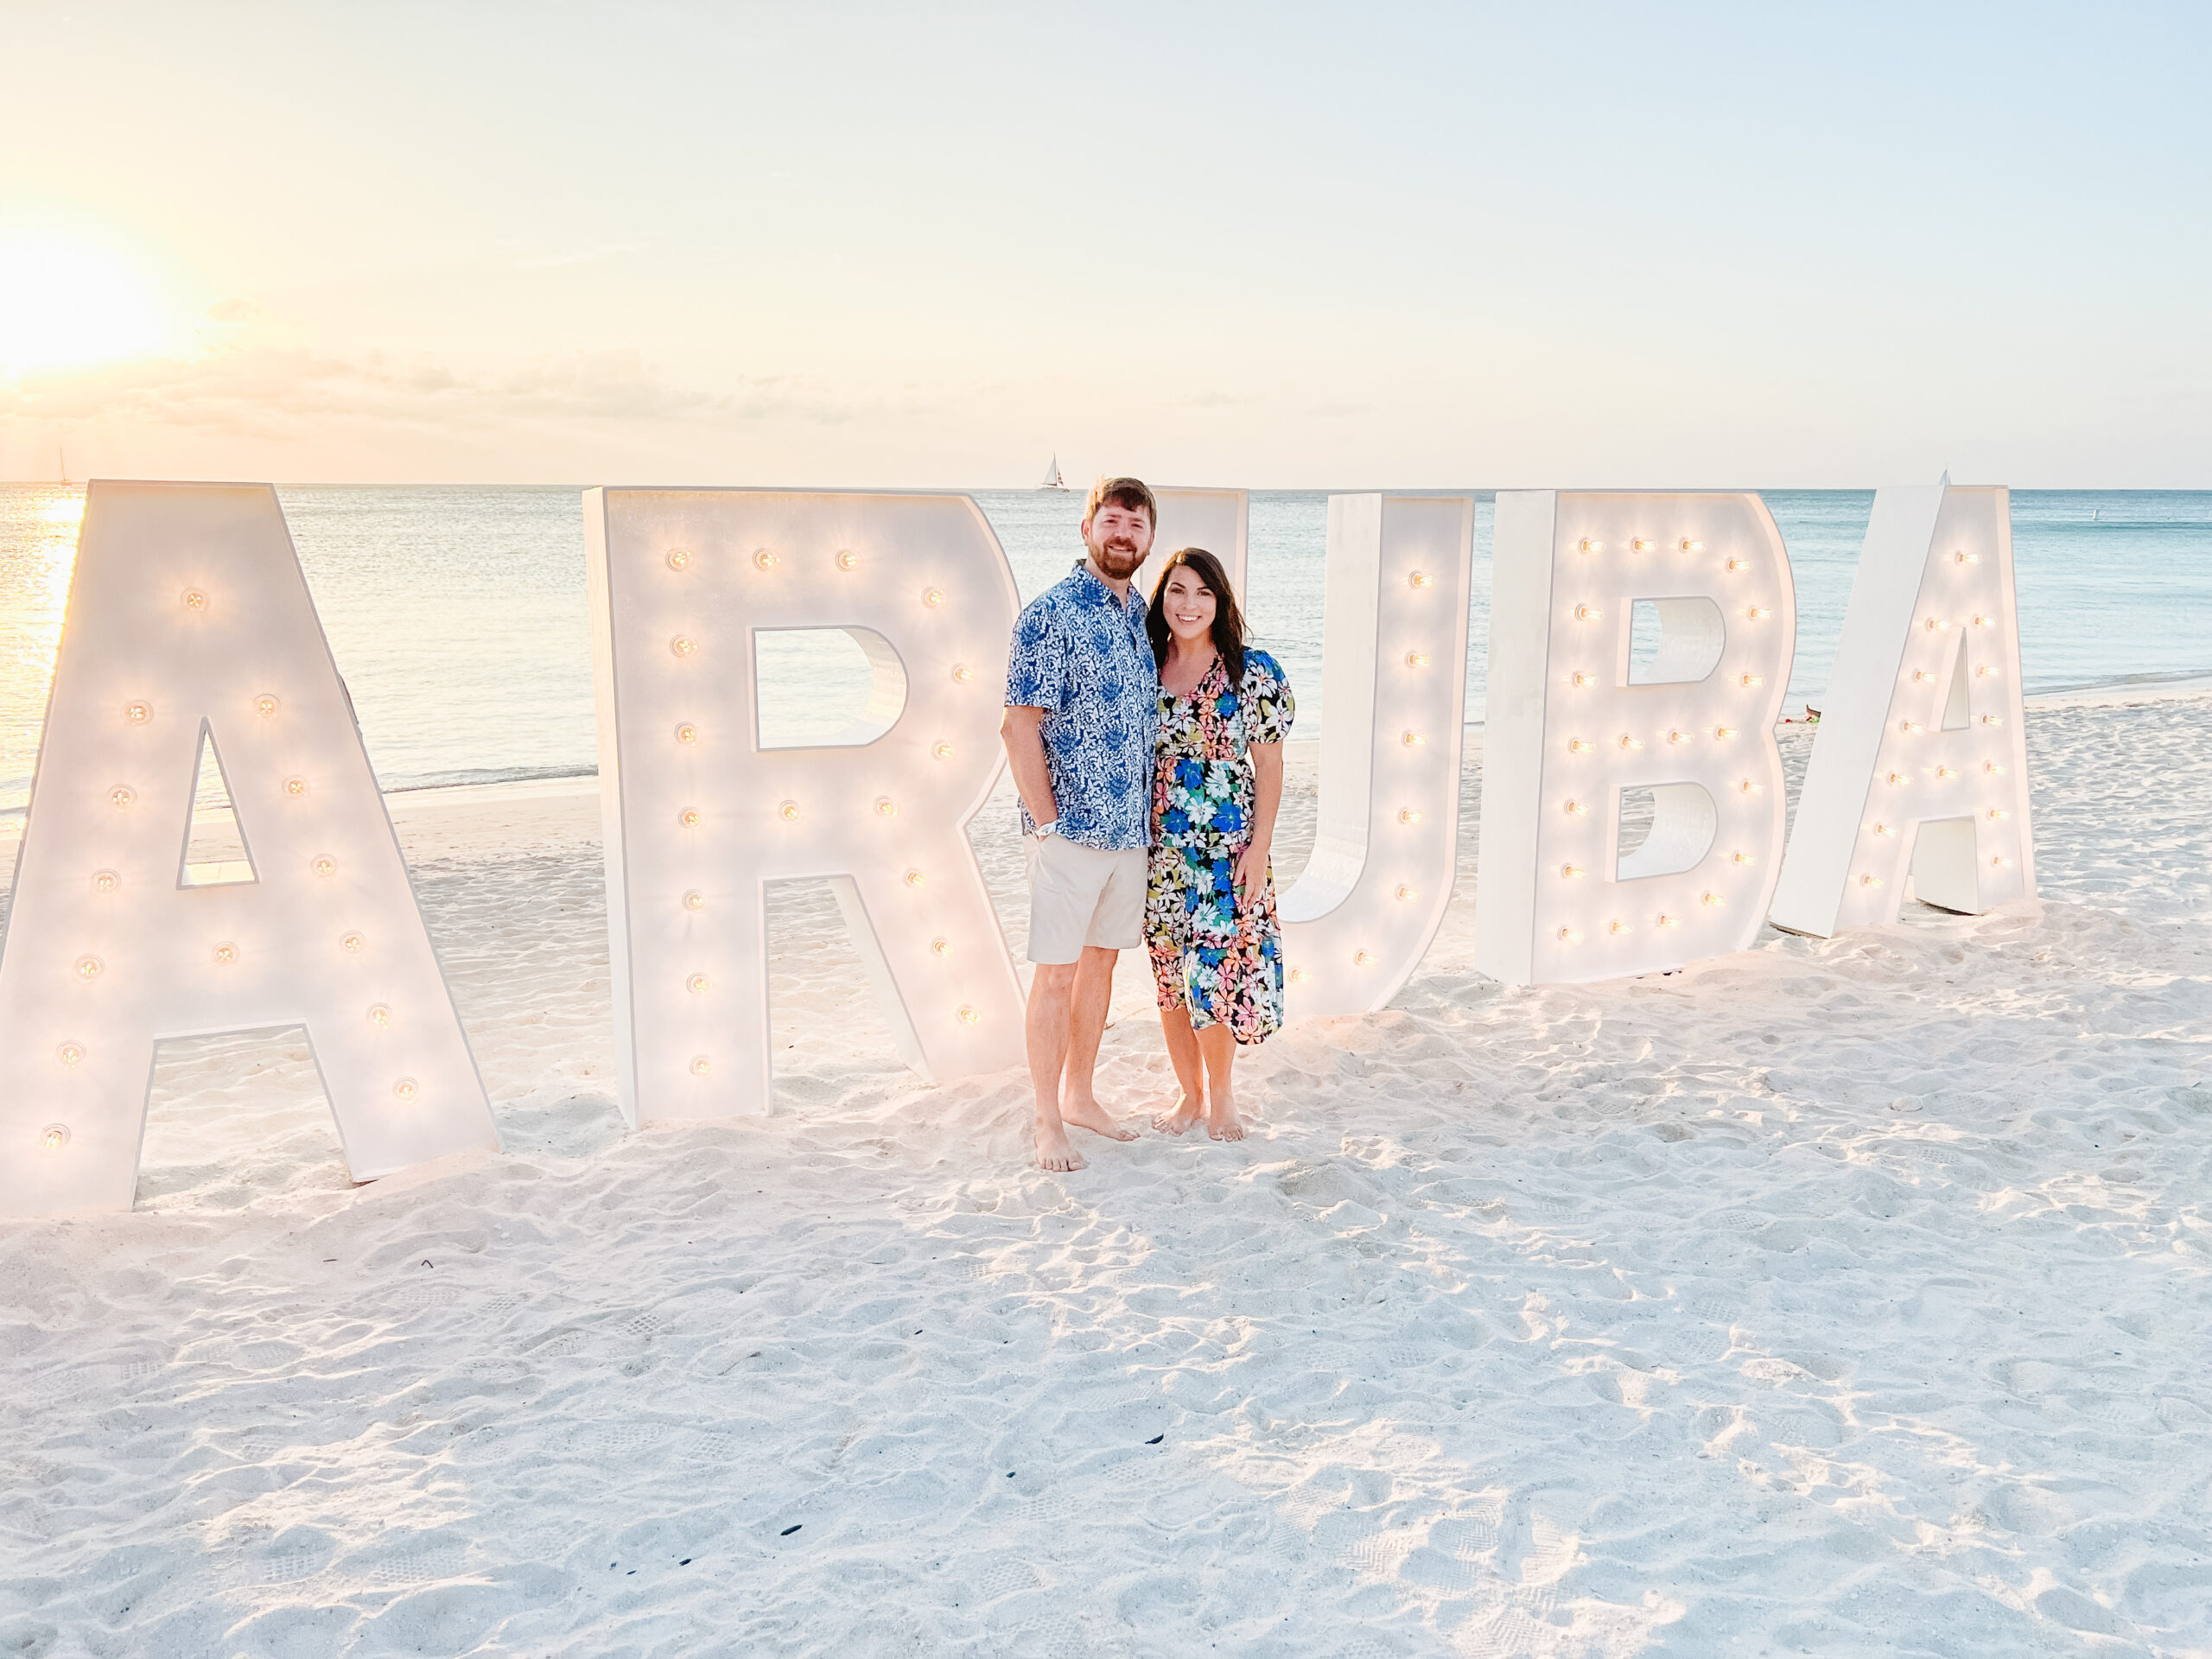 Couple standing on the beach in front of large marquee letters spelling Aruba